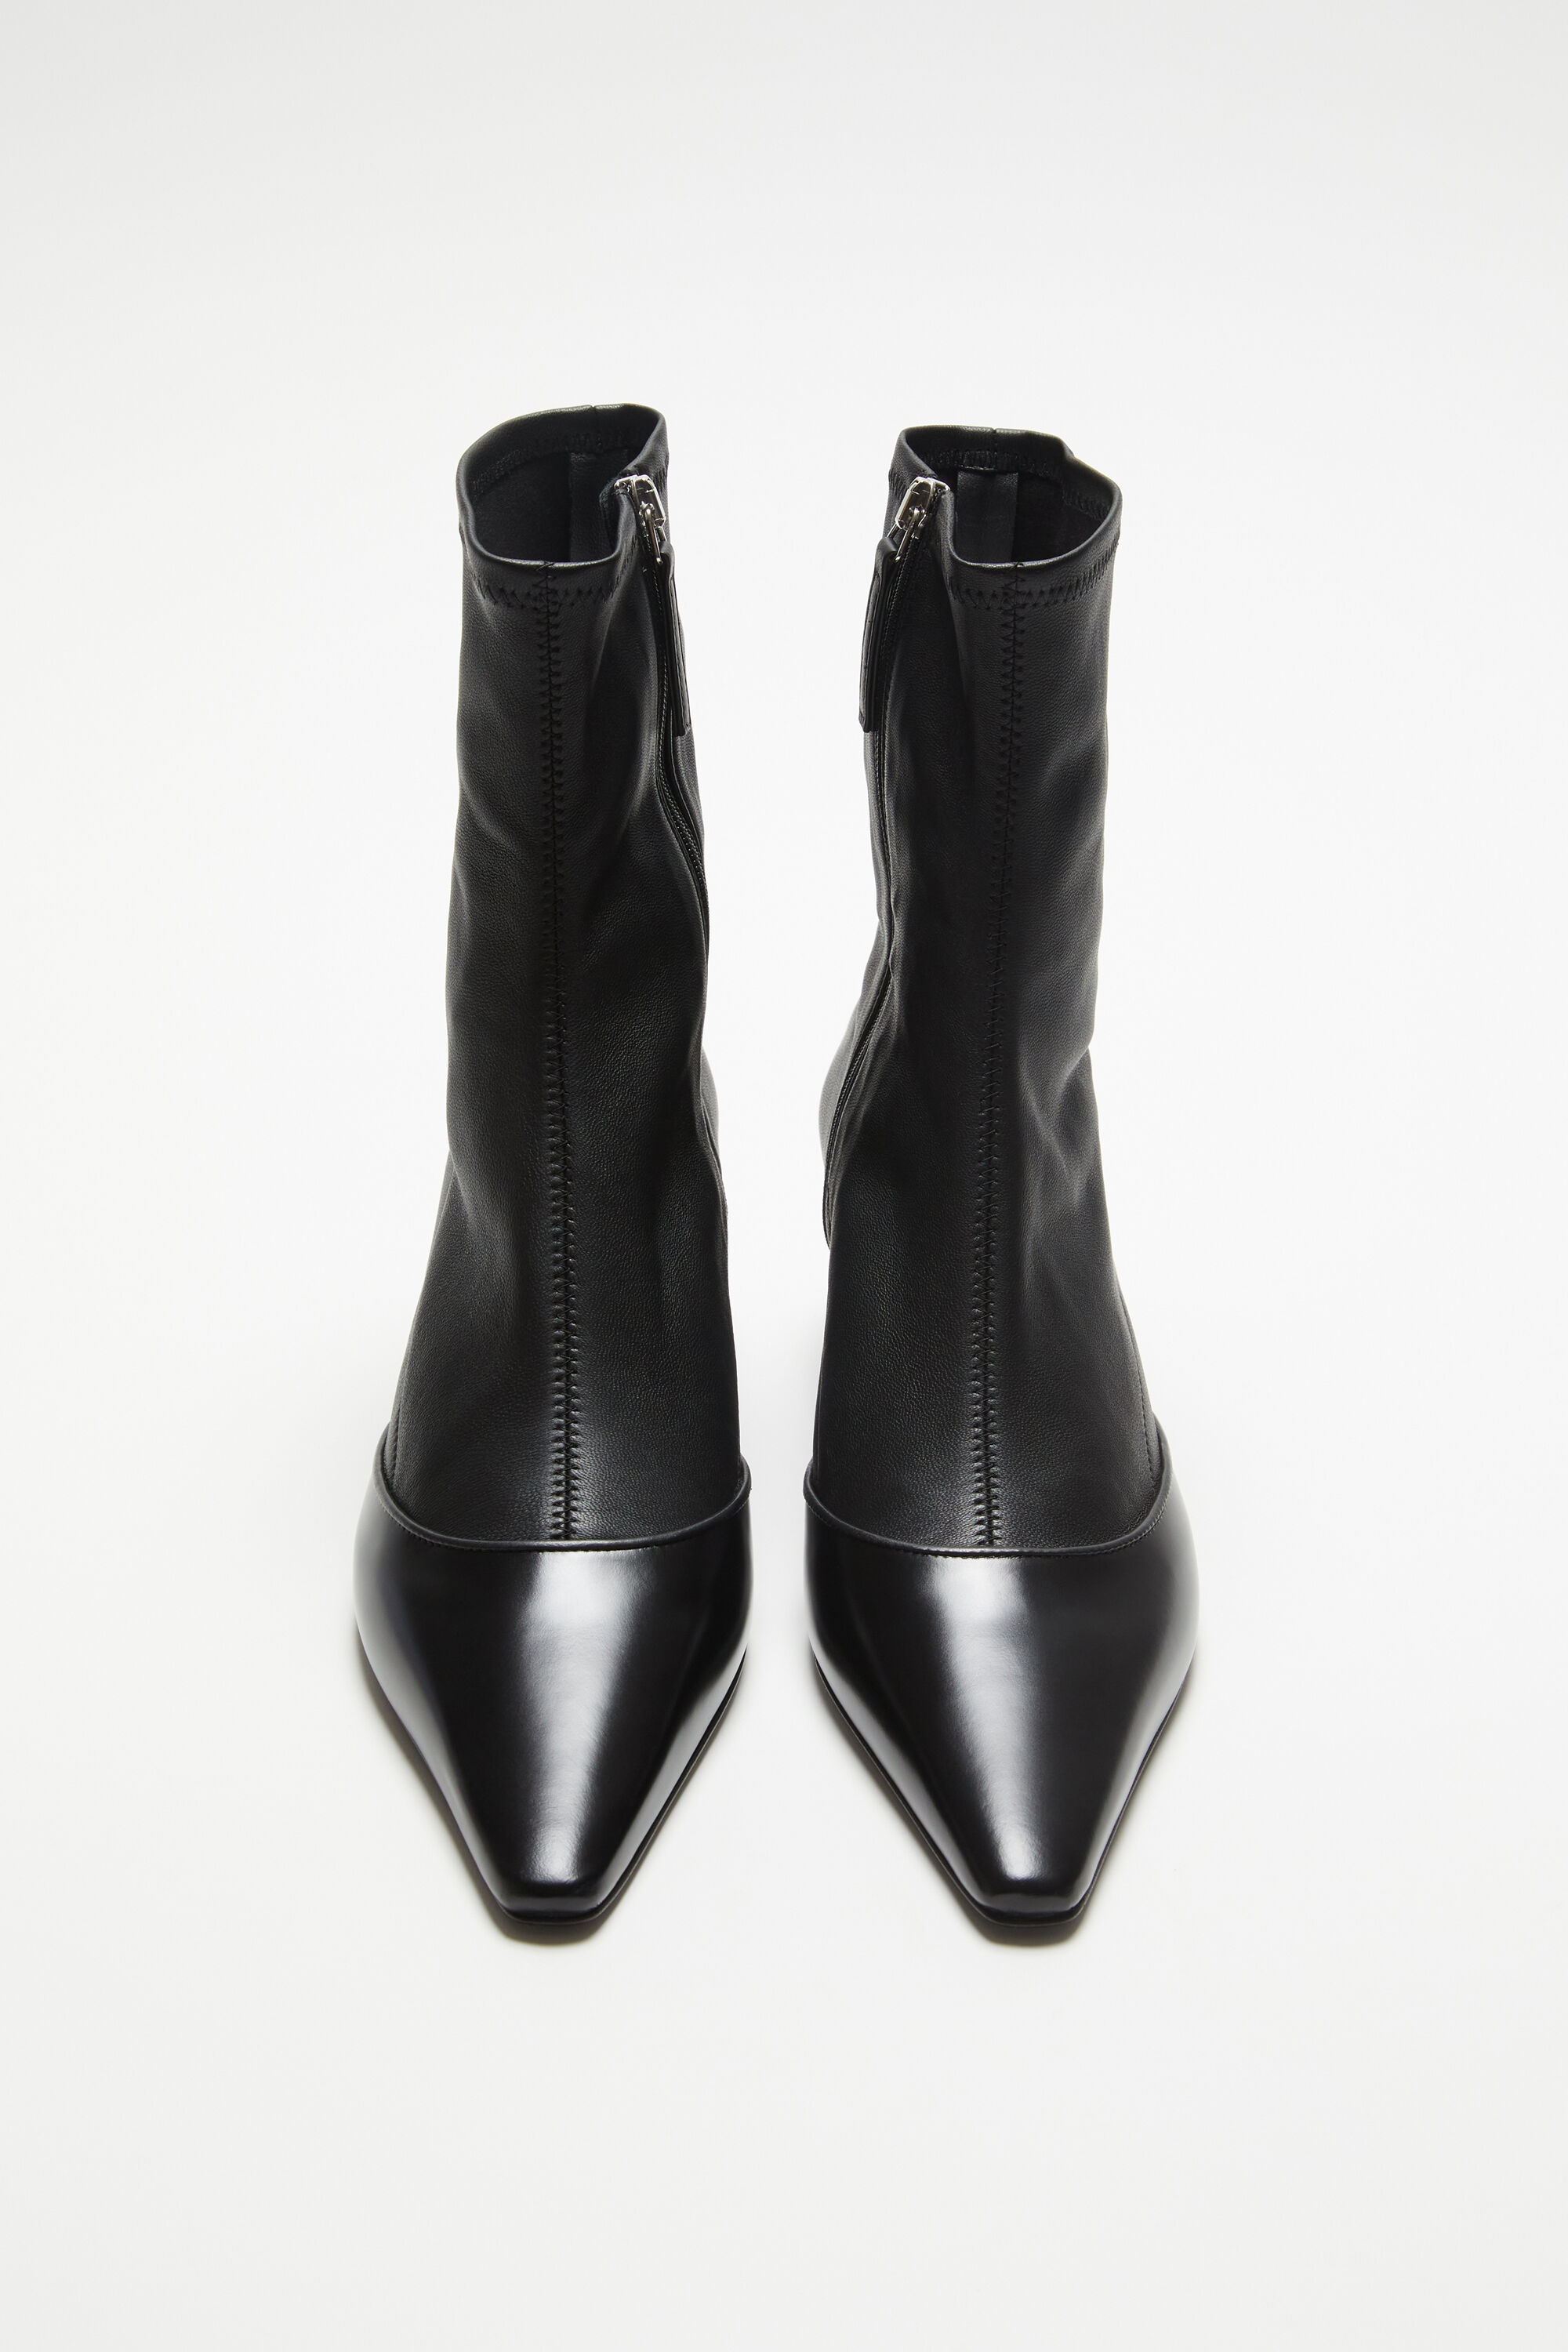 Acne Studios - Heeled ankle boots - Black